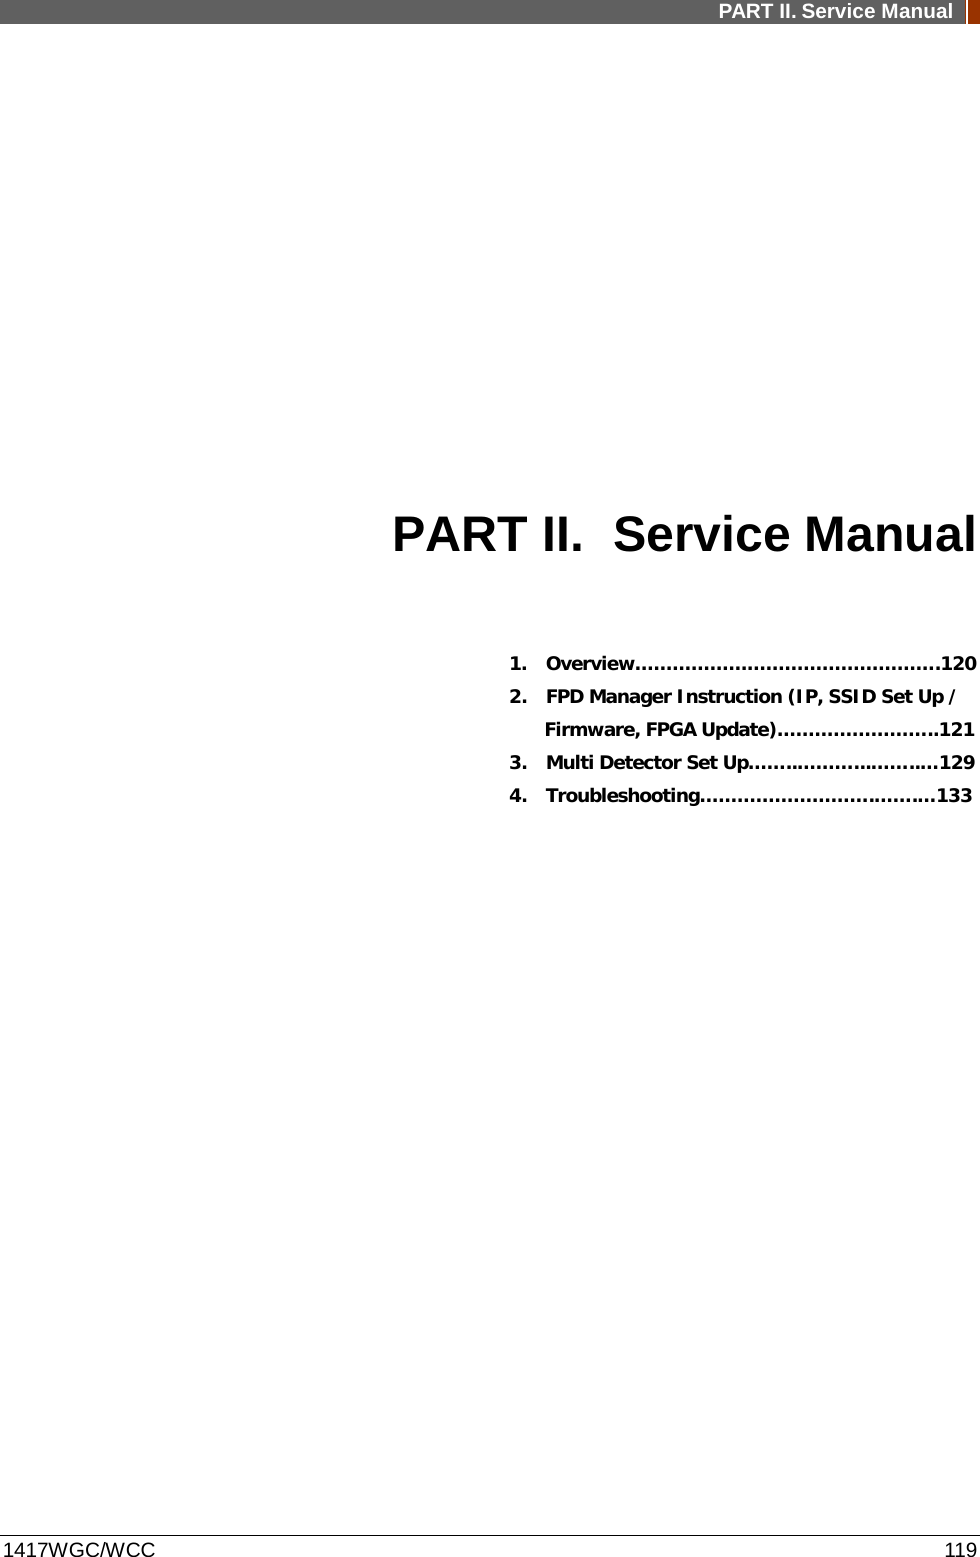 PART II. Service Manual  1417WGC/WCC 119 PART II. Service Manual  1.  Overview………………………………………….120 2.    FPD Manager Instruction (IP, SSID Set Up /   Firmware, FPGA Update)……………………..121 3.   Multi Detector Set Up……..………...……..…129 4.   Troubleshooting……………………….…….…133               